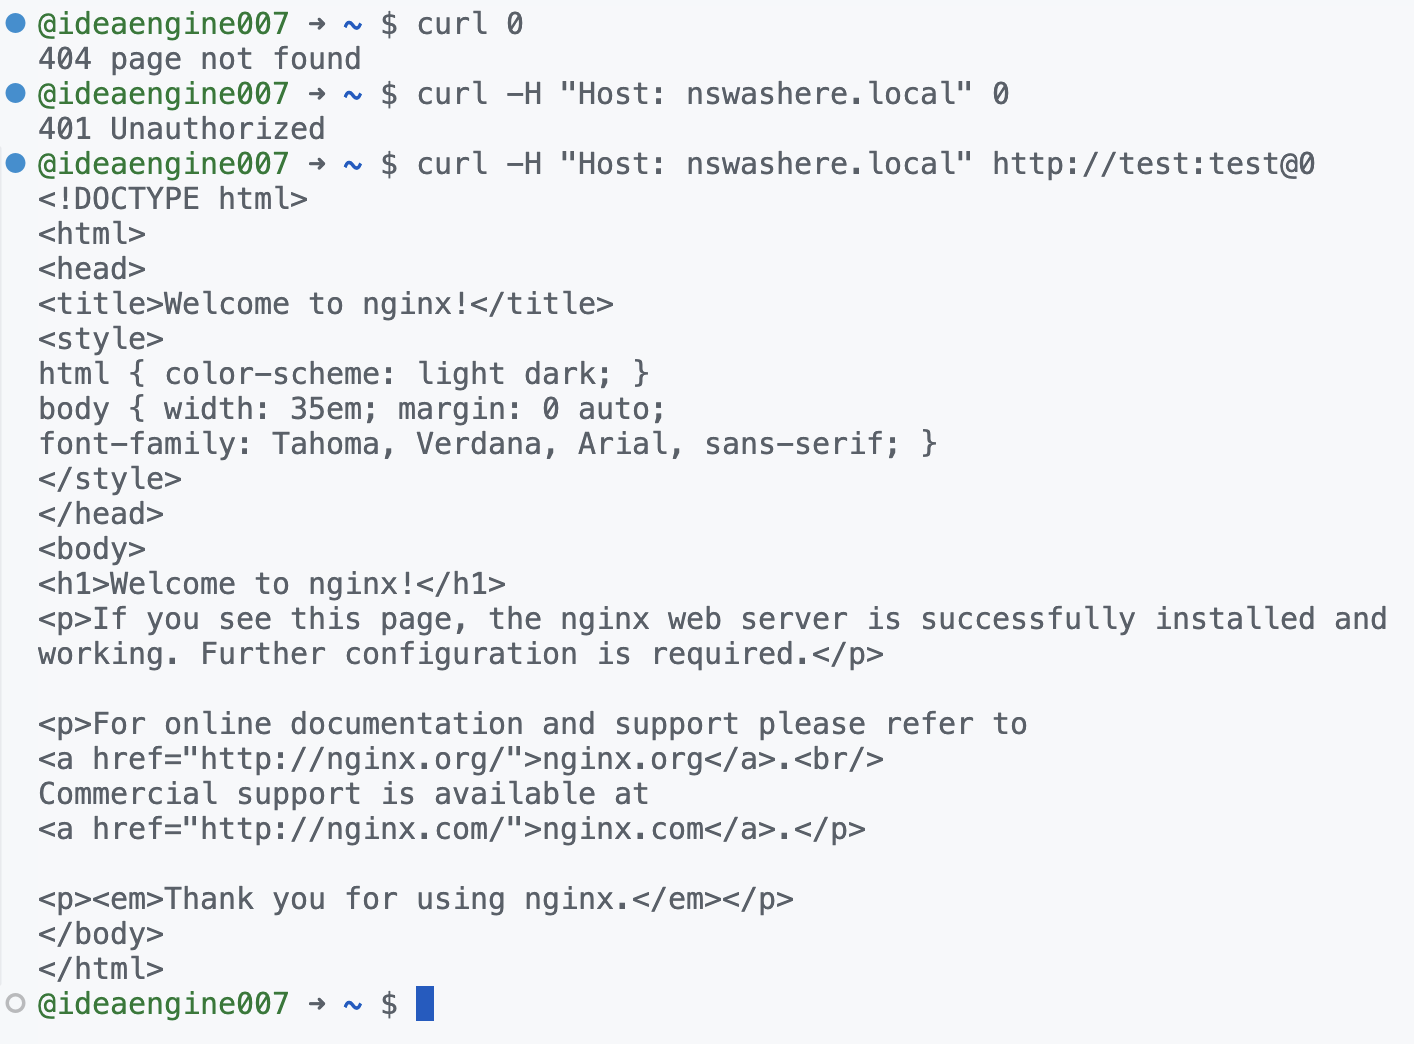 Figure 12. Incoming request validated only when the host header matches “nswashere.local” and request is authorized